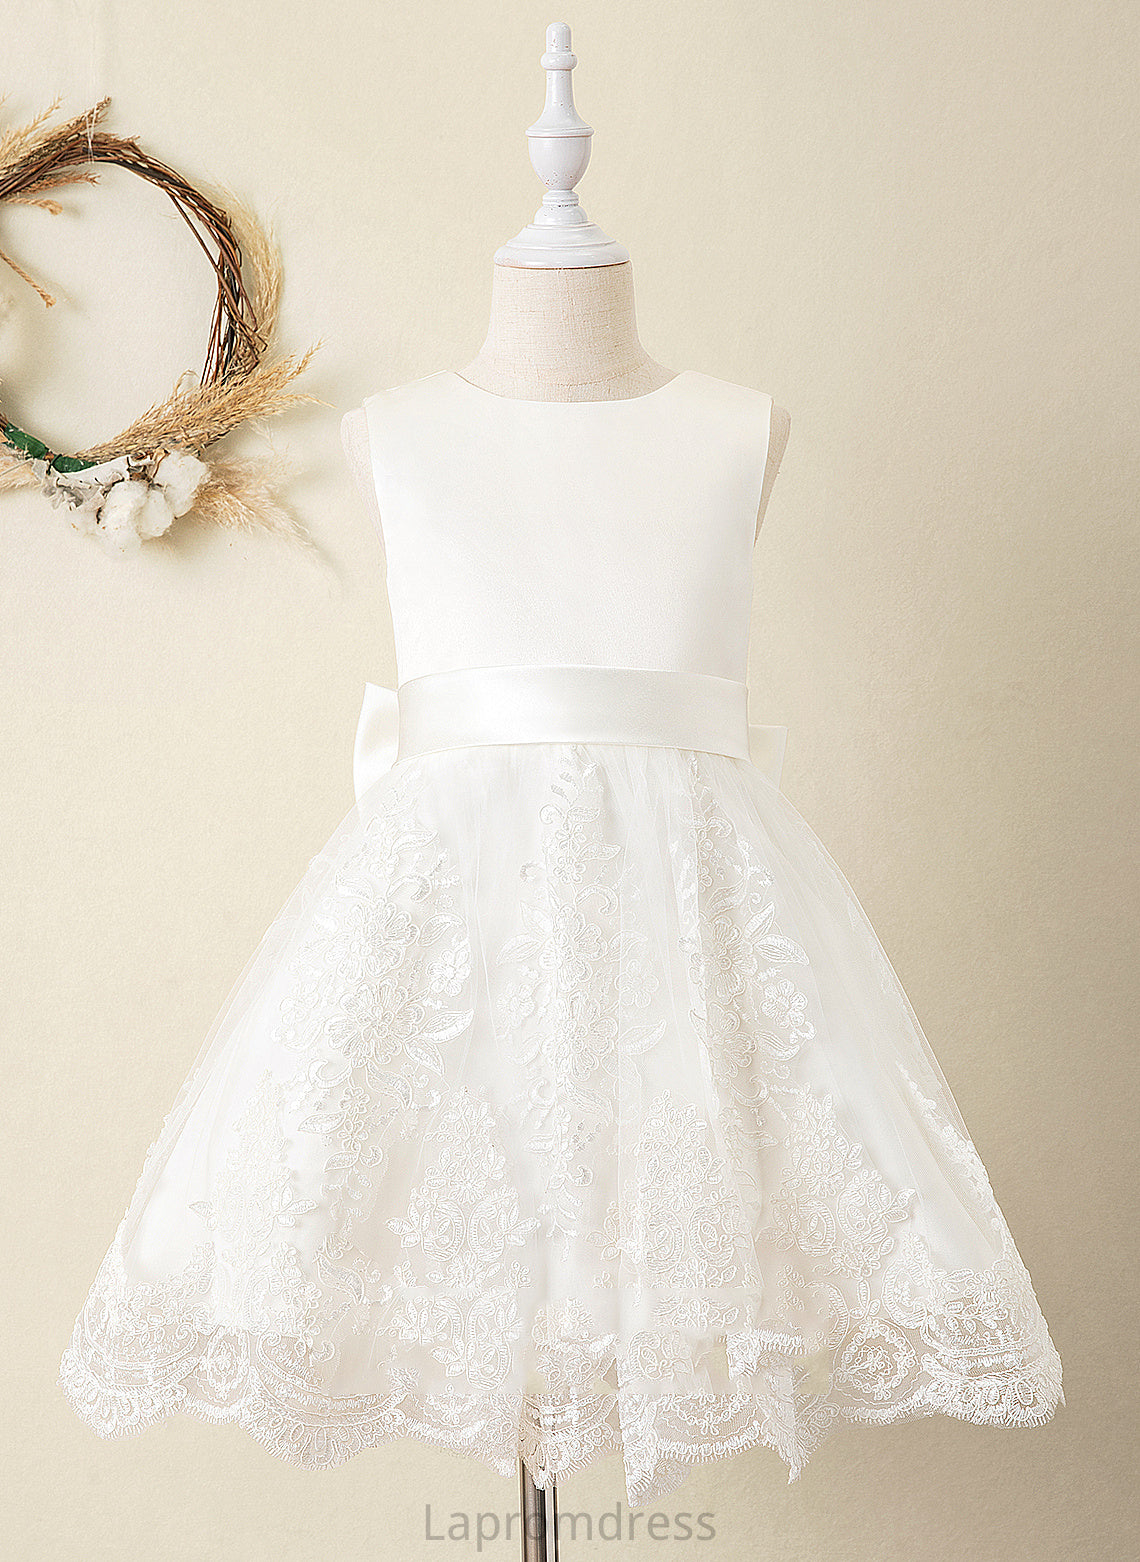 Knee-length - With Bow(s) Dress Flower Satin/Lace Camryn Ball-Gown/Princess (Undetachable Sleeveless Flower Girl Dresses Neck Girl sash) Scoop